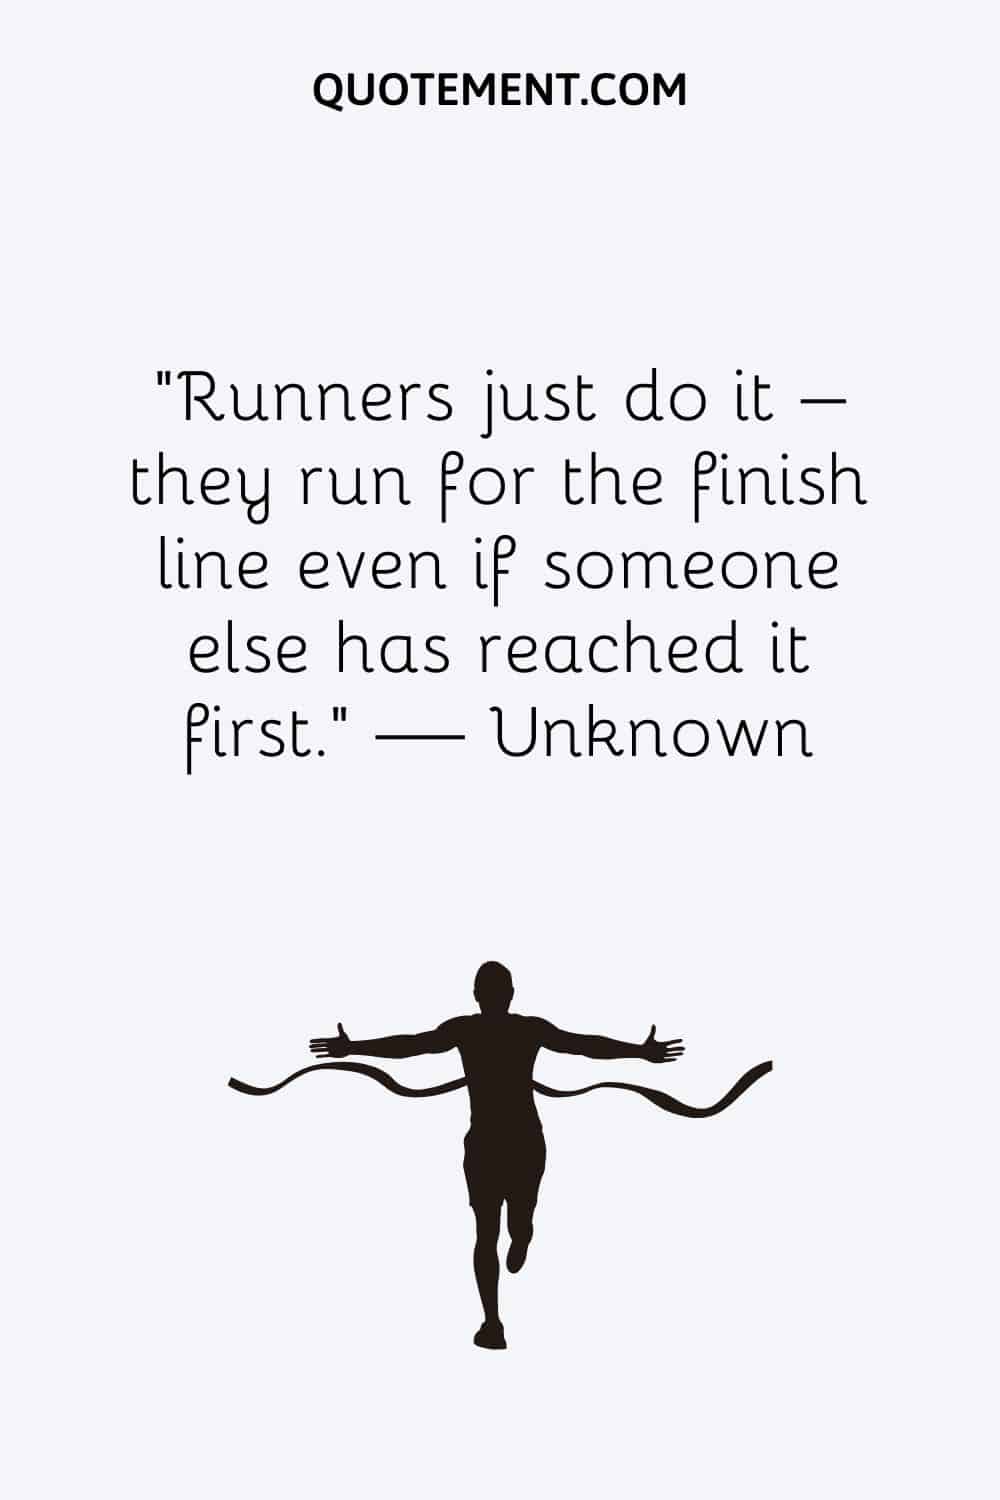 Runners just do it – they run for the finish line even if someone else has reached it first.